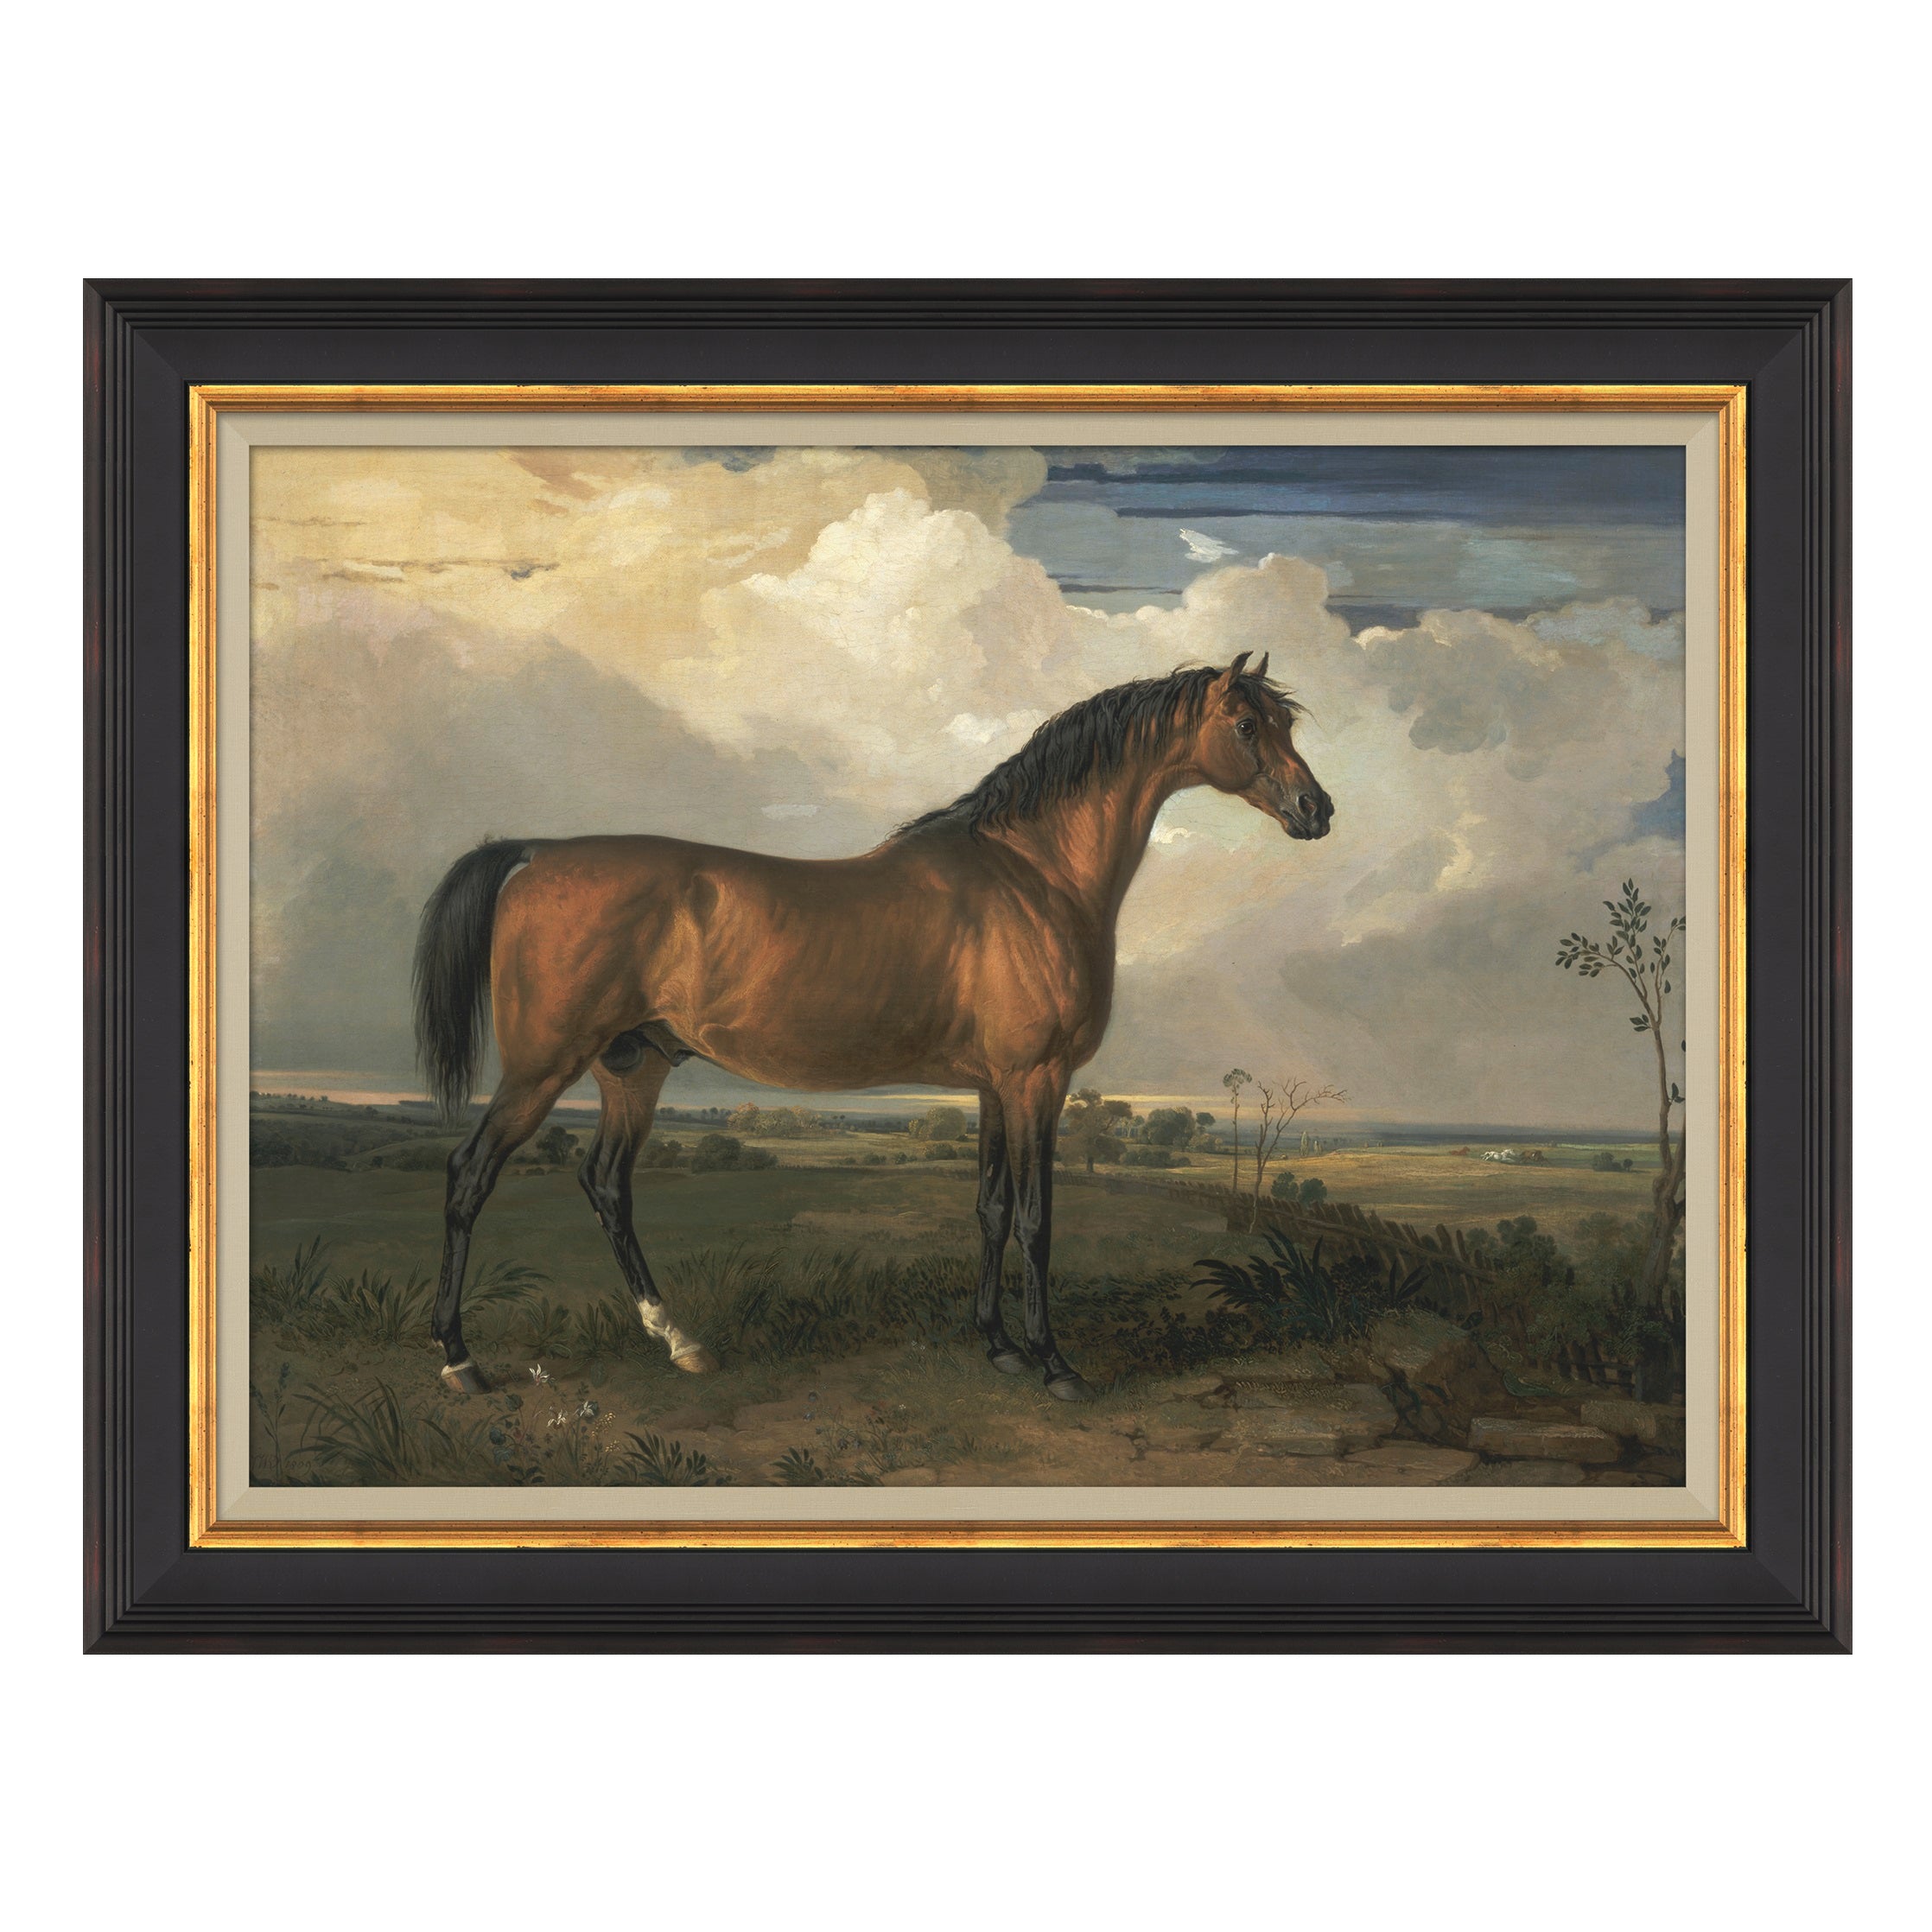 Framed wall art called equestrian study shows a horse in a field with clouds in background